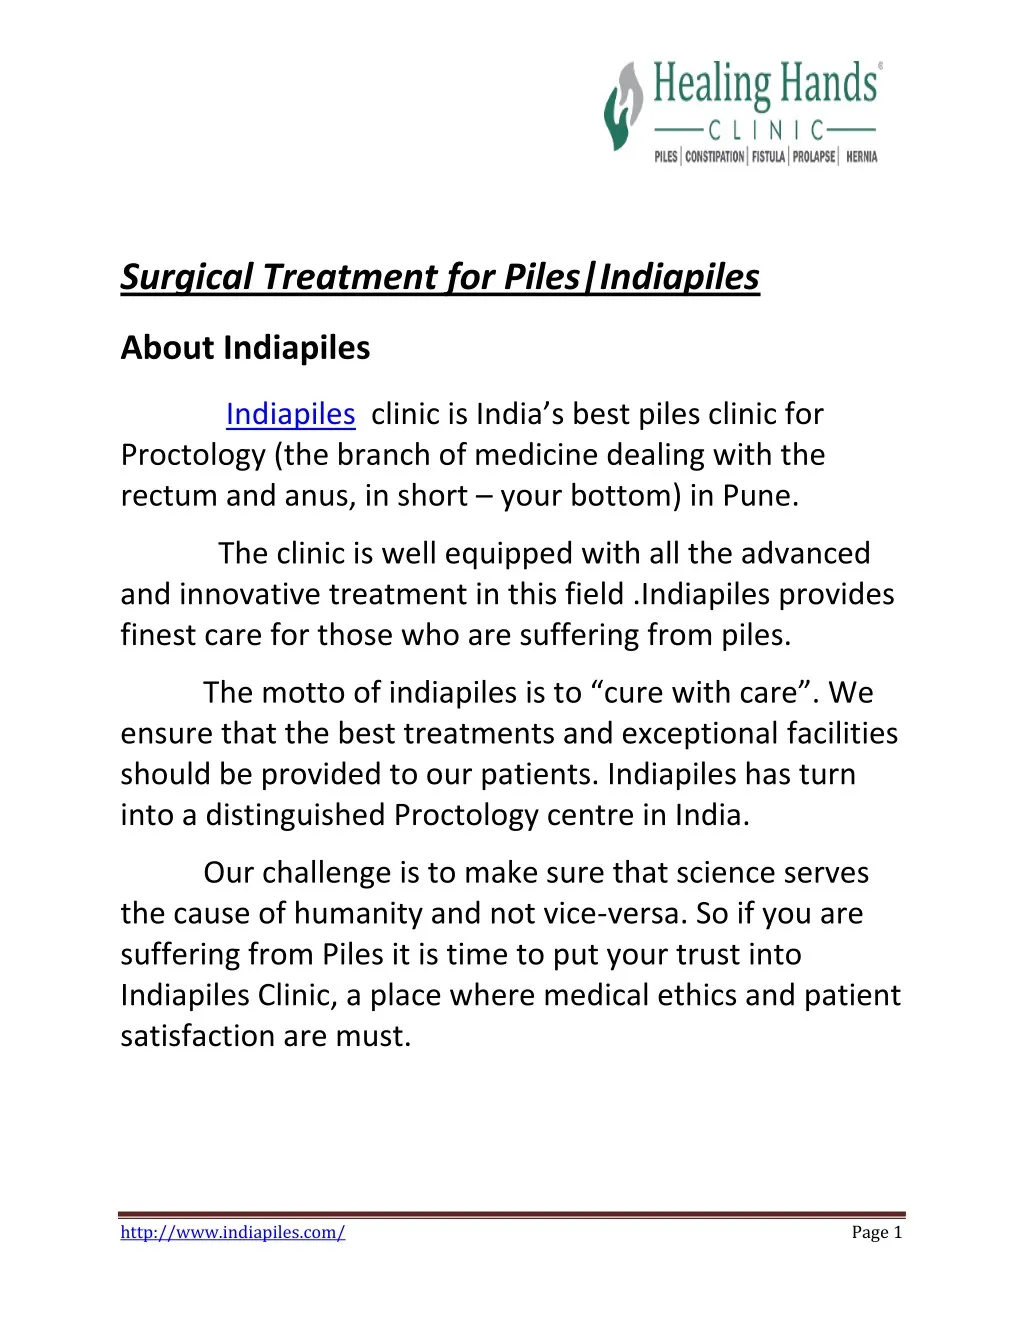 surgical treatment for piles indiapiles